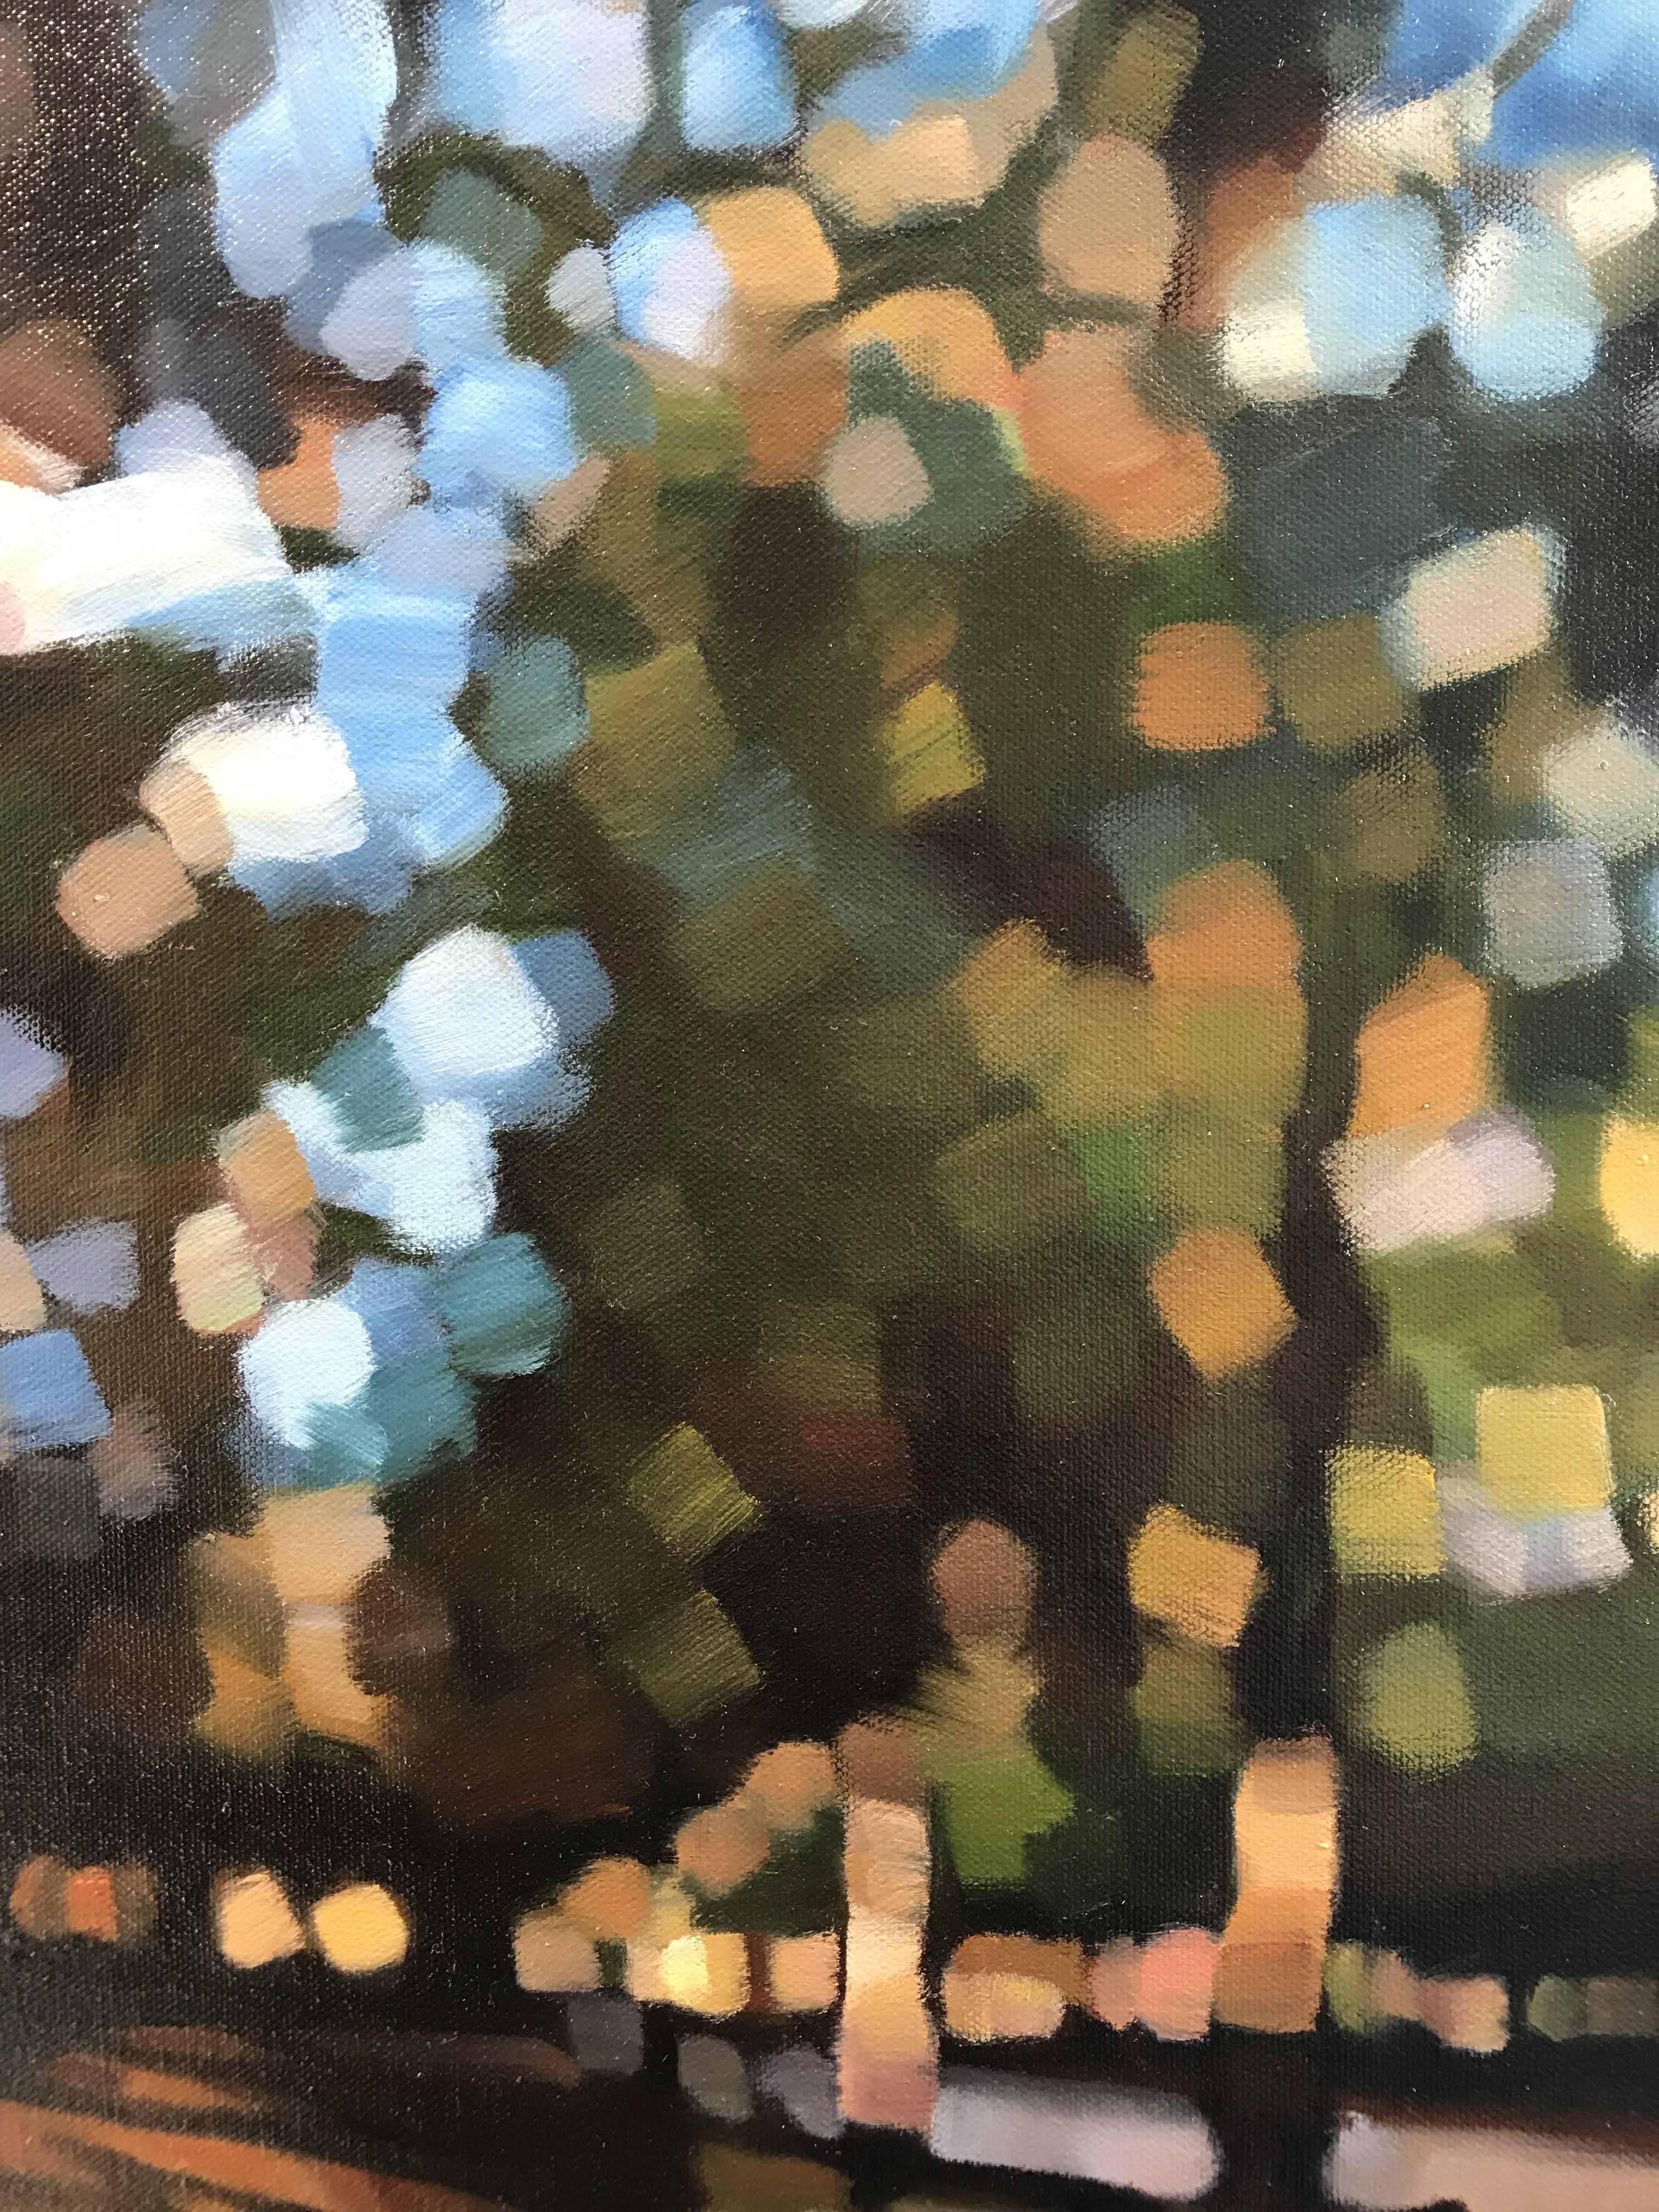 Mishael Coggeshall-Burr uses energetic and deft brushstrokes in green, blue, brown, yellow, and grey to depict the vibrant Jardin du Luxembourg in Paris. At first glance, this abstract landscape resembles the dapples of light beaming through